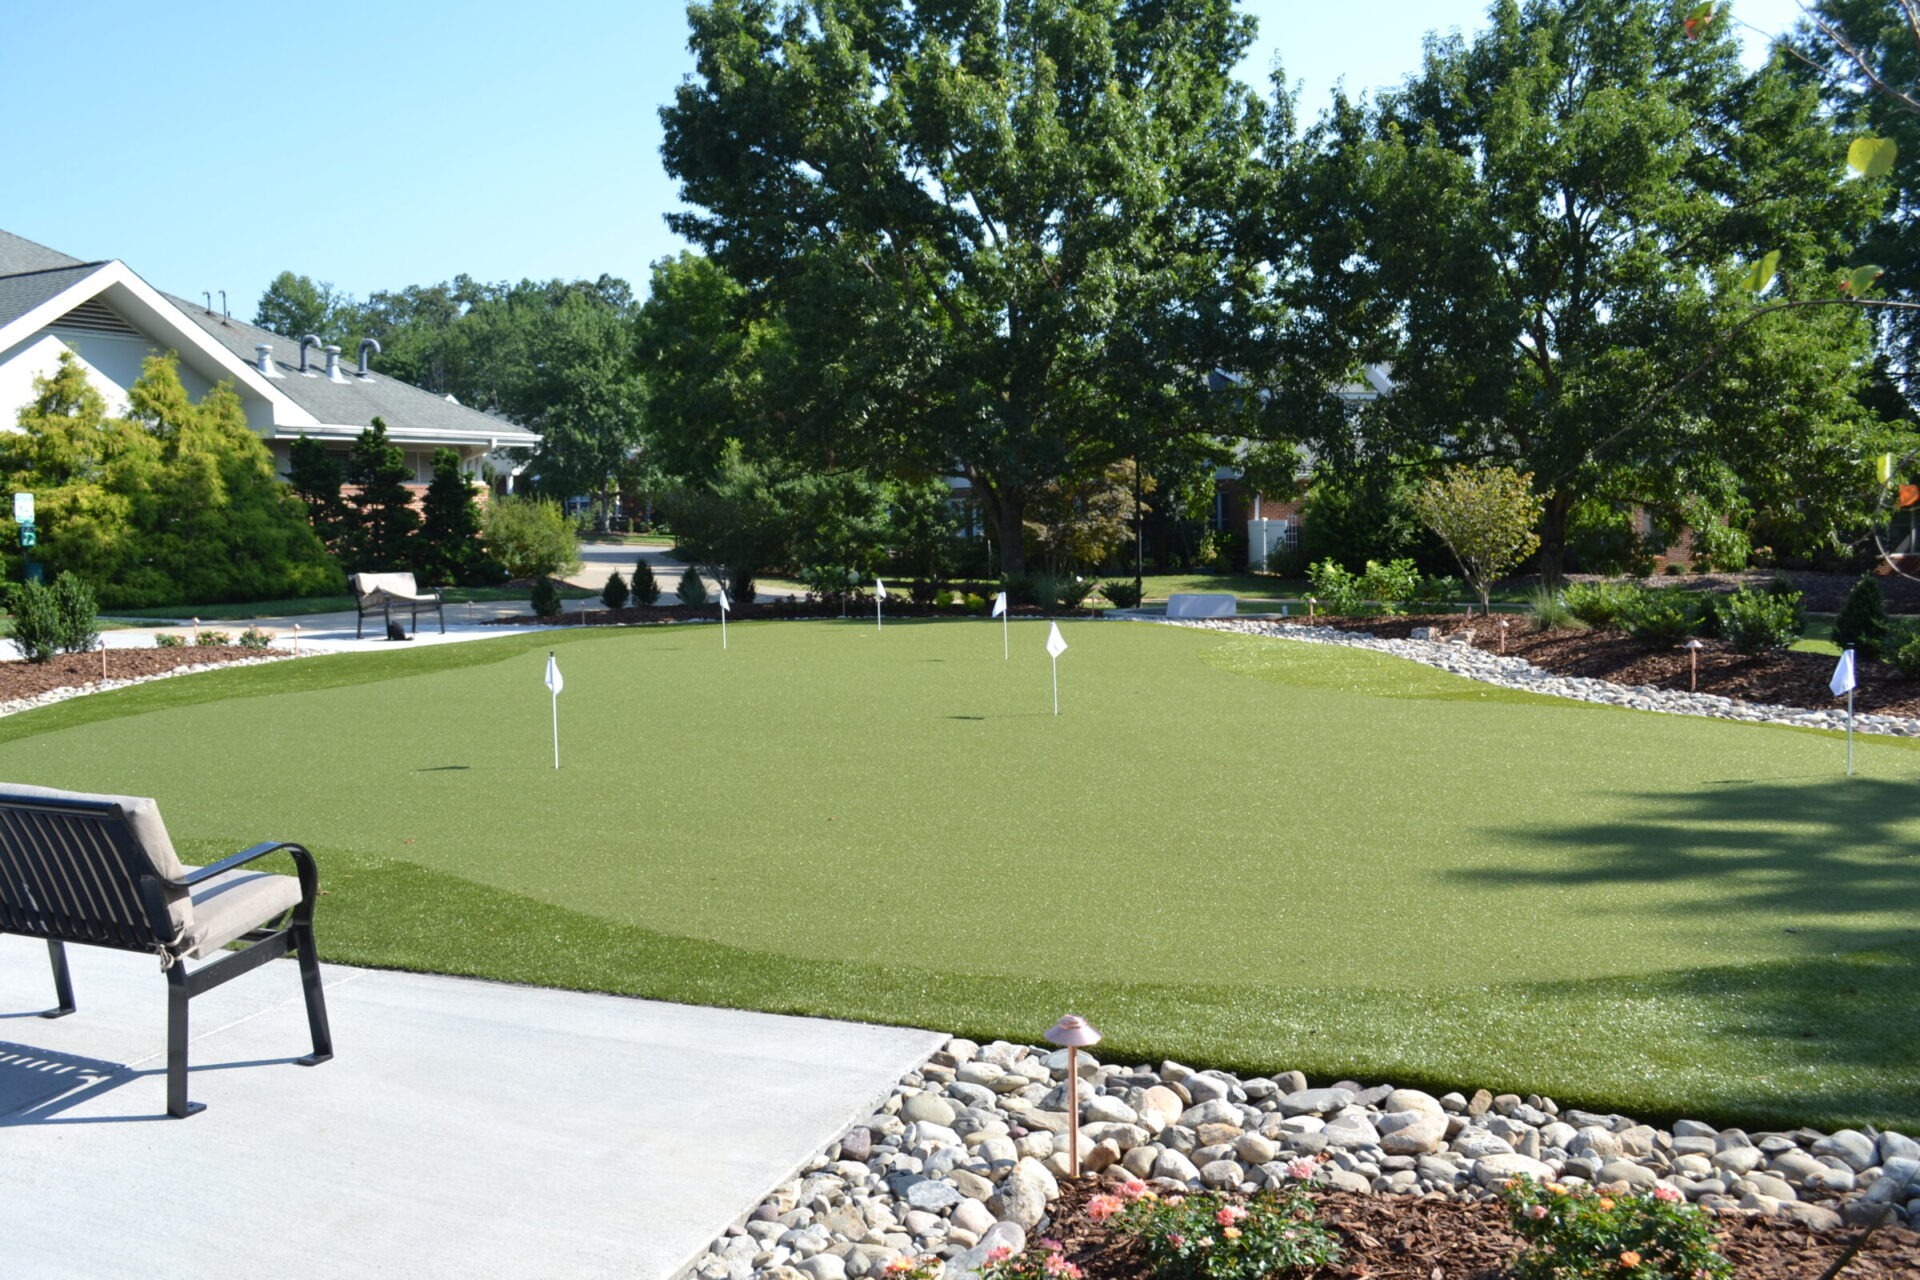 A well-maintained synthetic putting green with several holes and flags is surrounded by shrubs, trees, a bench, and a cobblestone border.